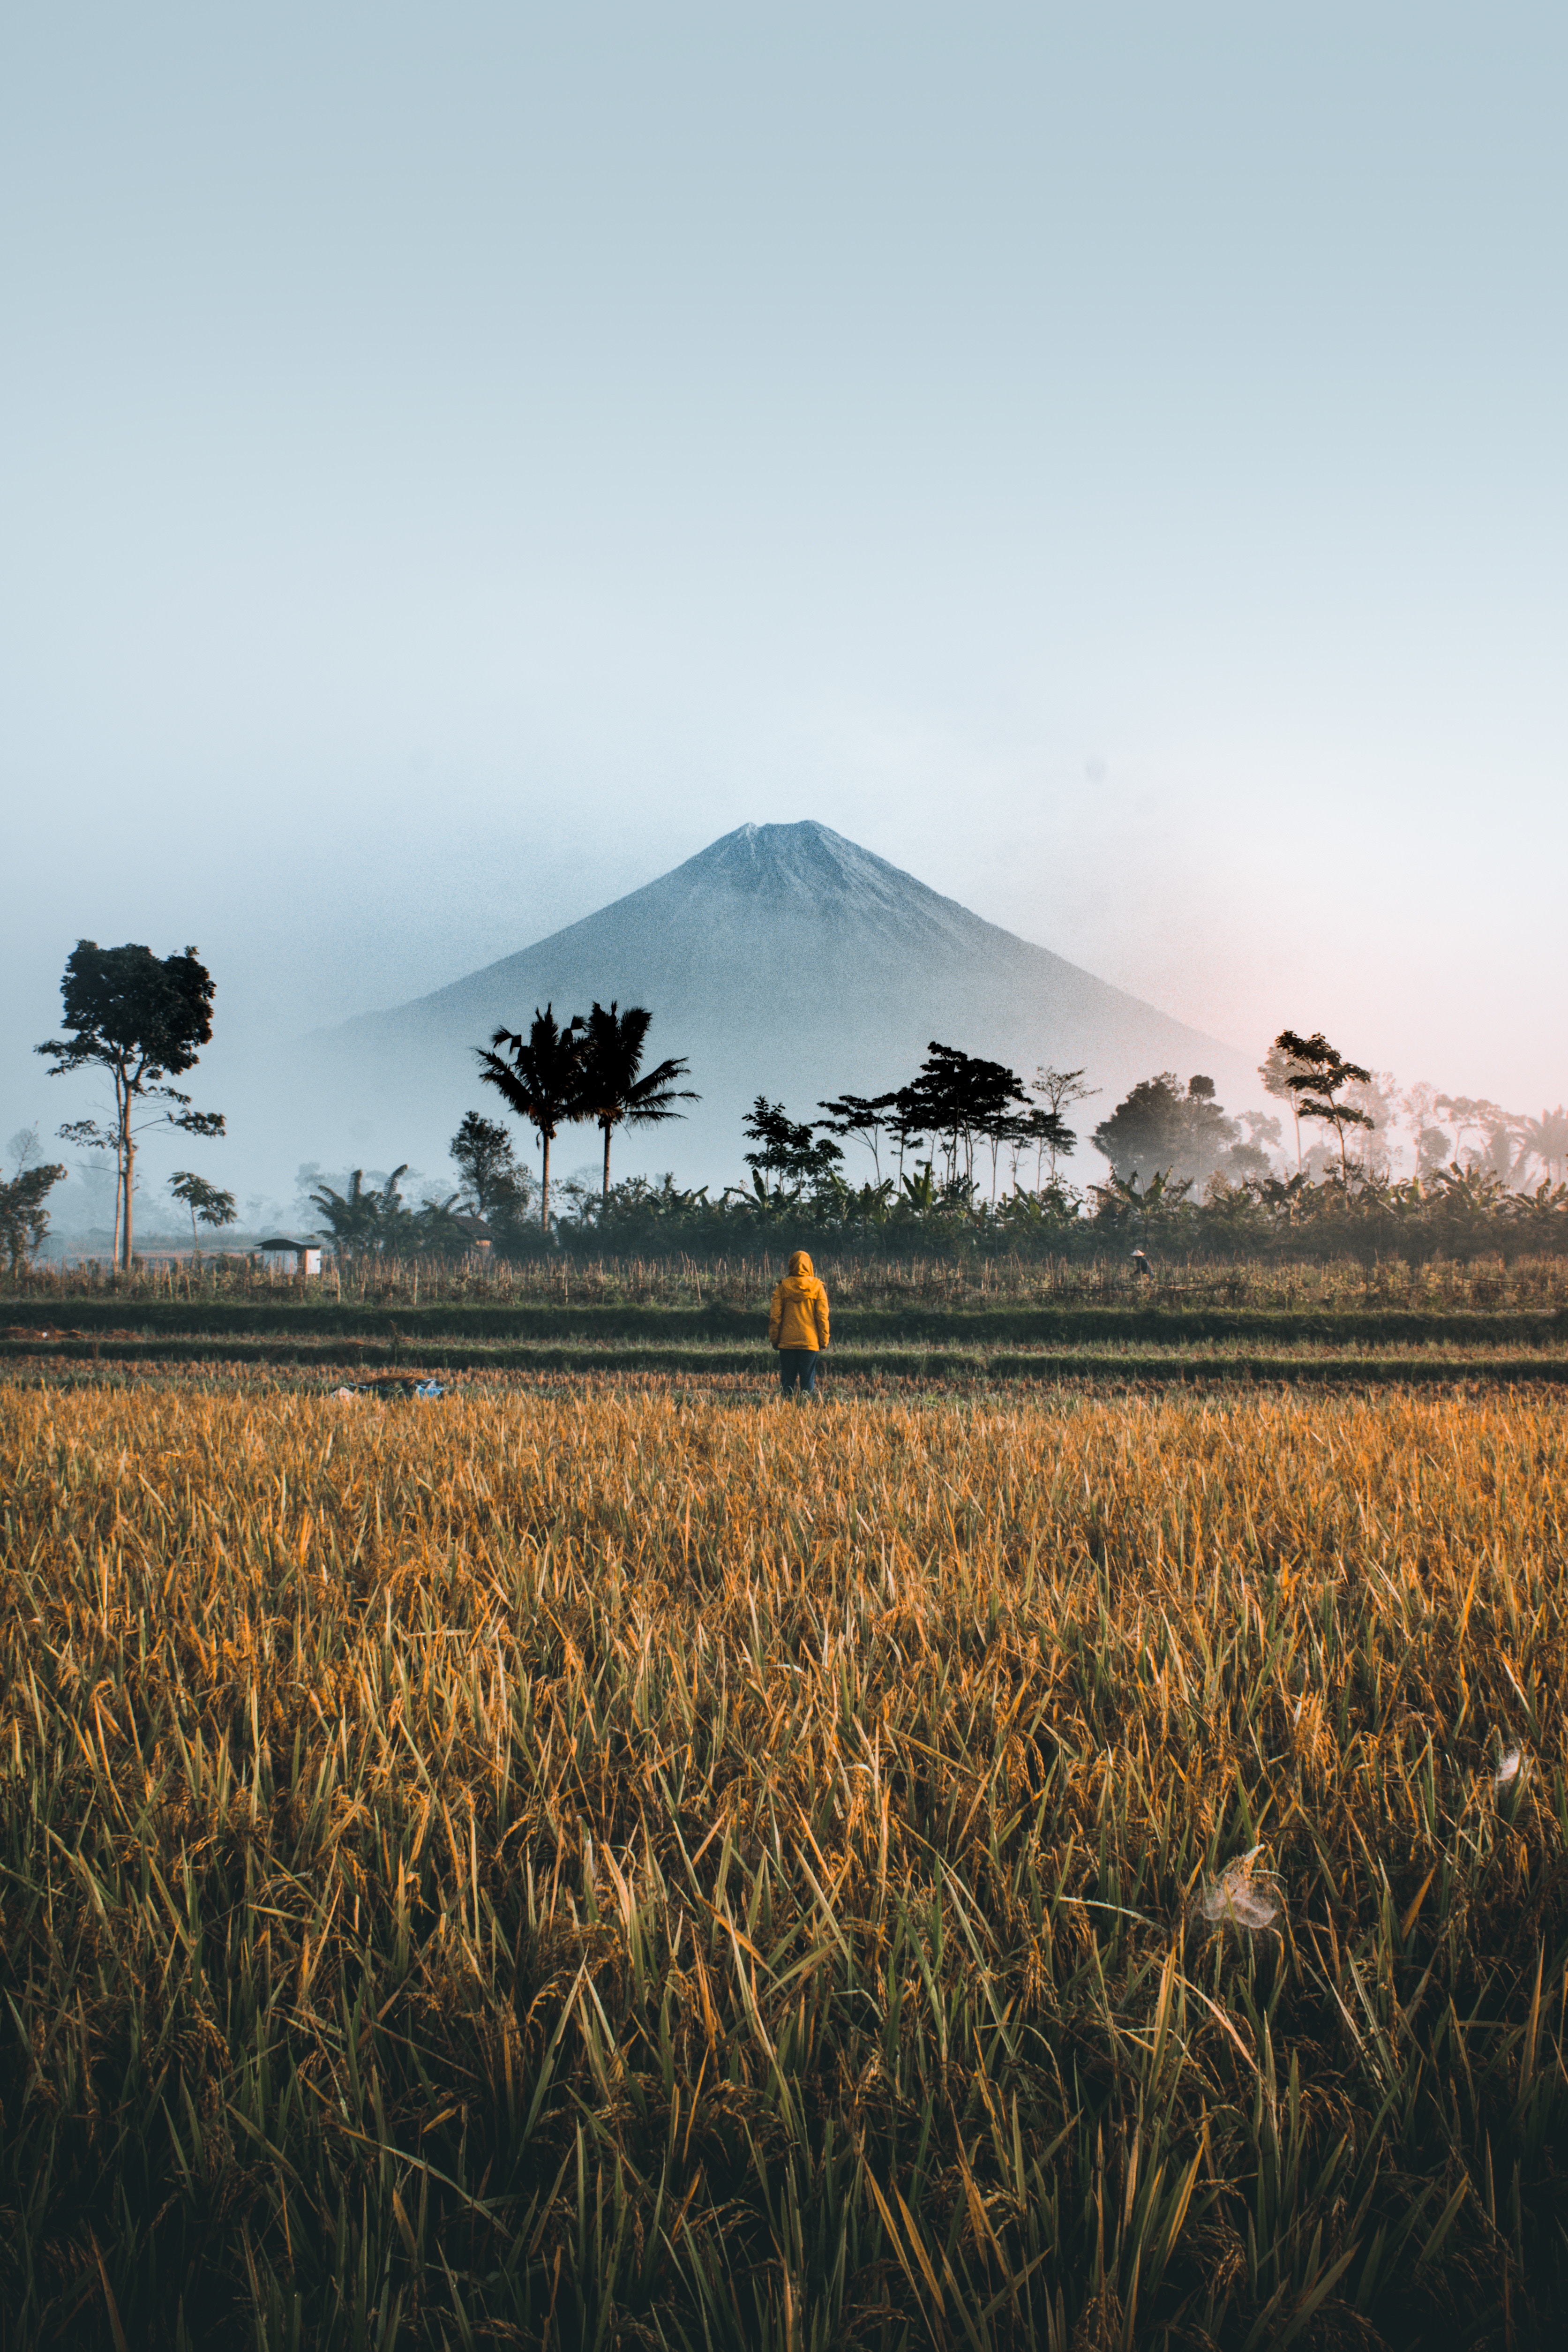 indonesia, nature, palms, mountain, privacy, seclusion, field, loneliness